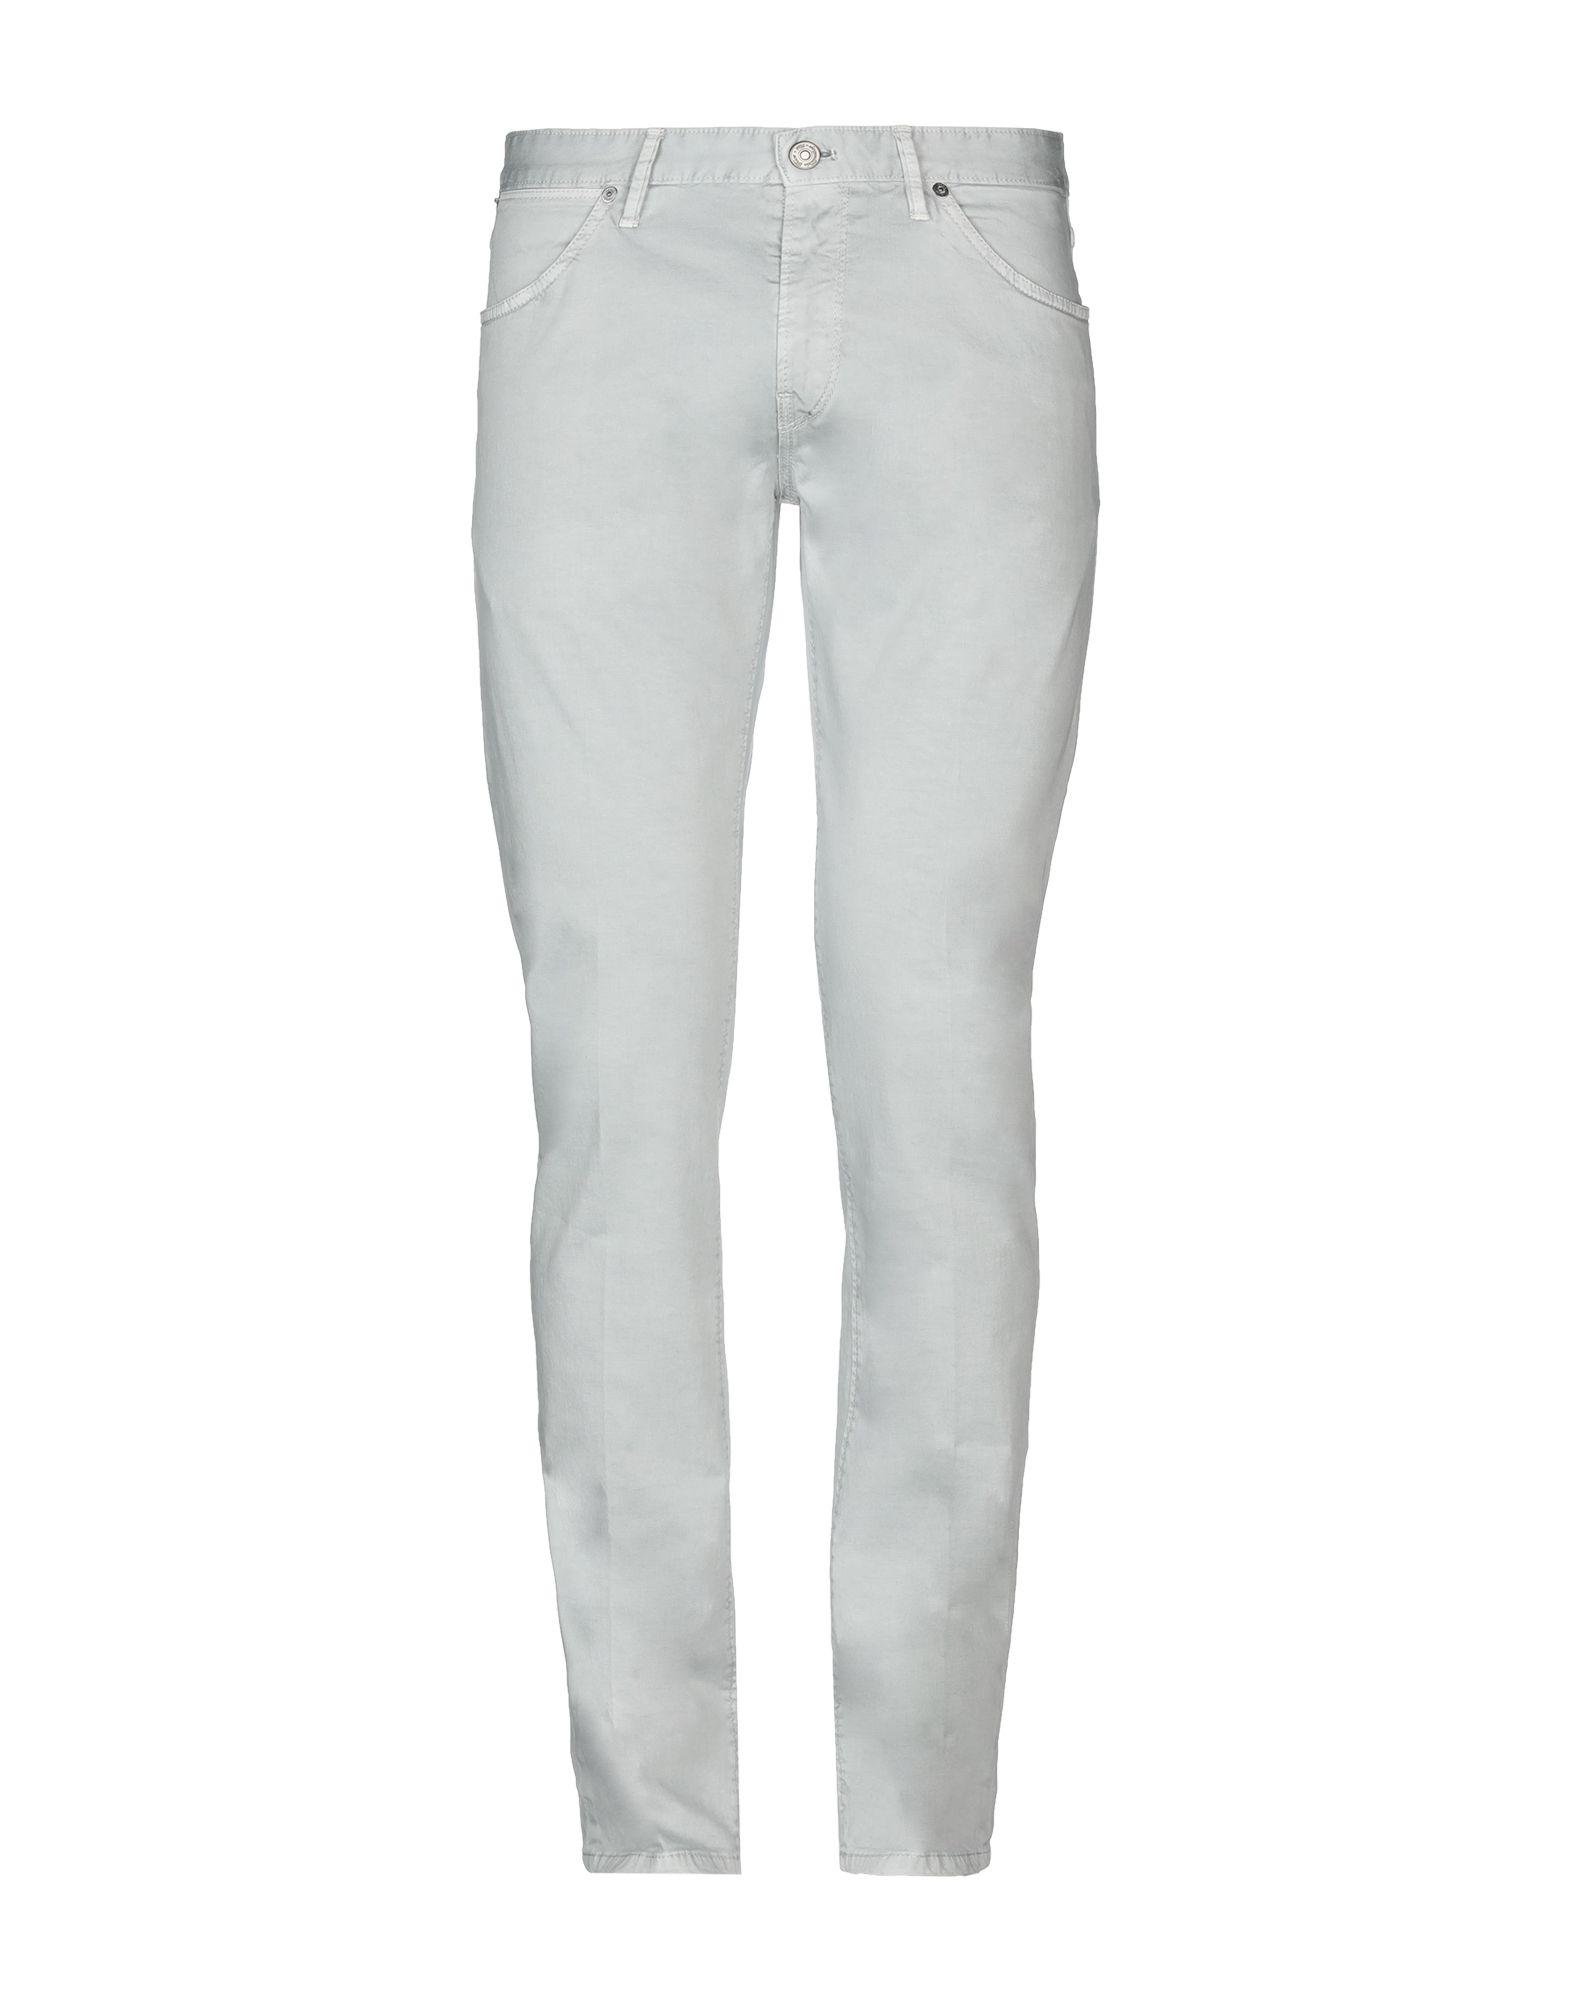 Pt05 Leather Casual Trouser in Light Grey (Gray) for Men - Lyst